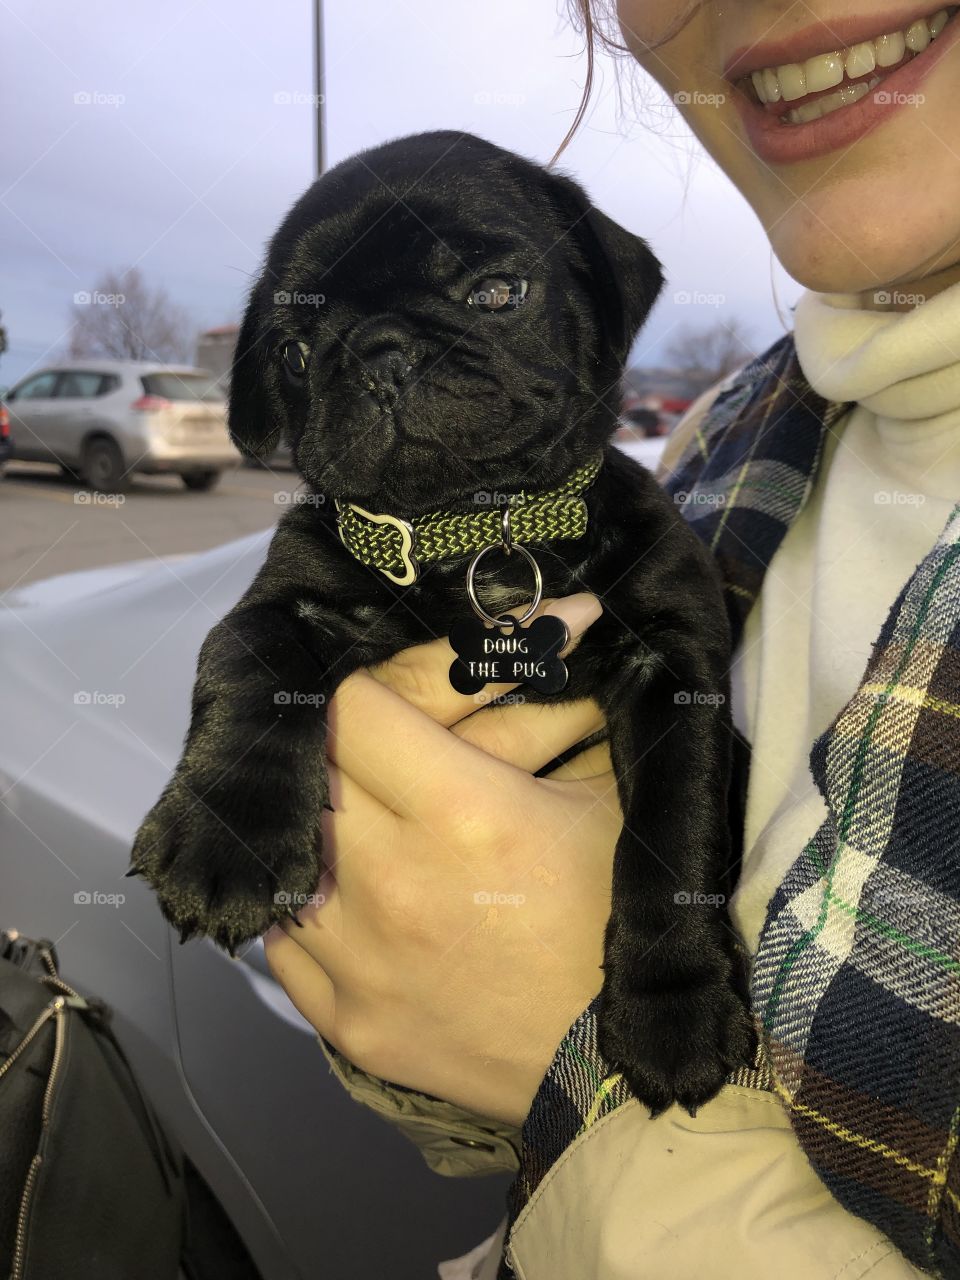 Newest member of our family, Doug the Pug. 